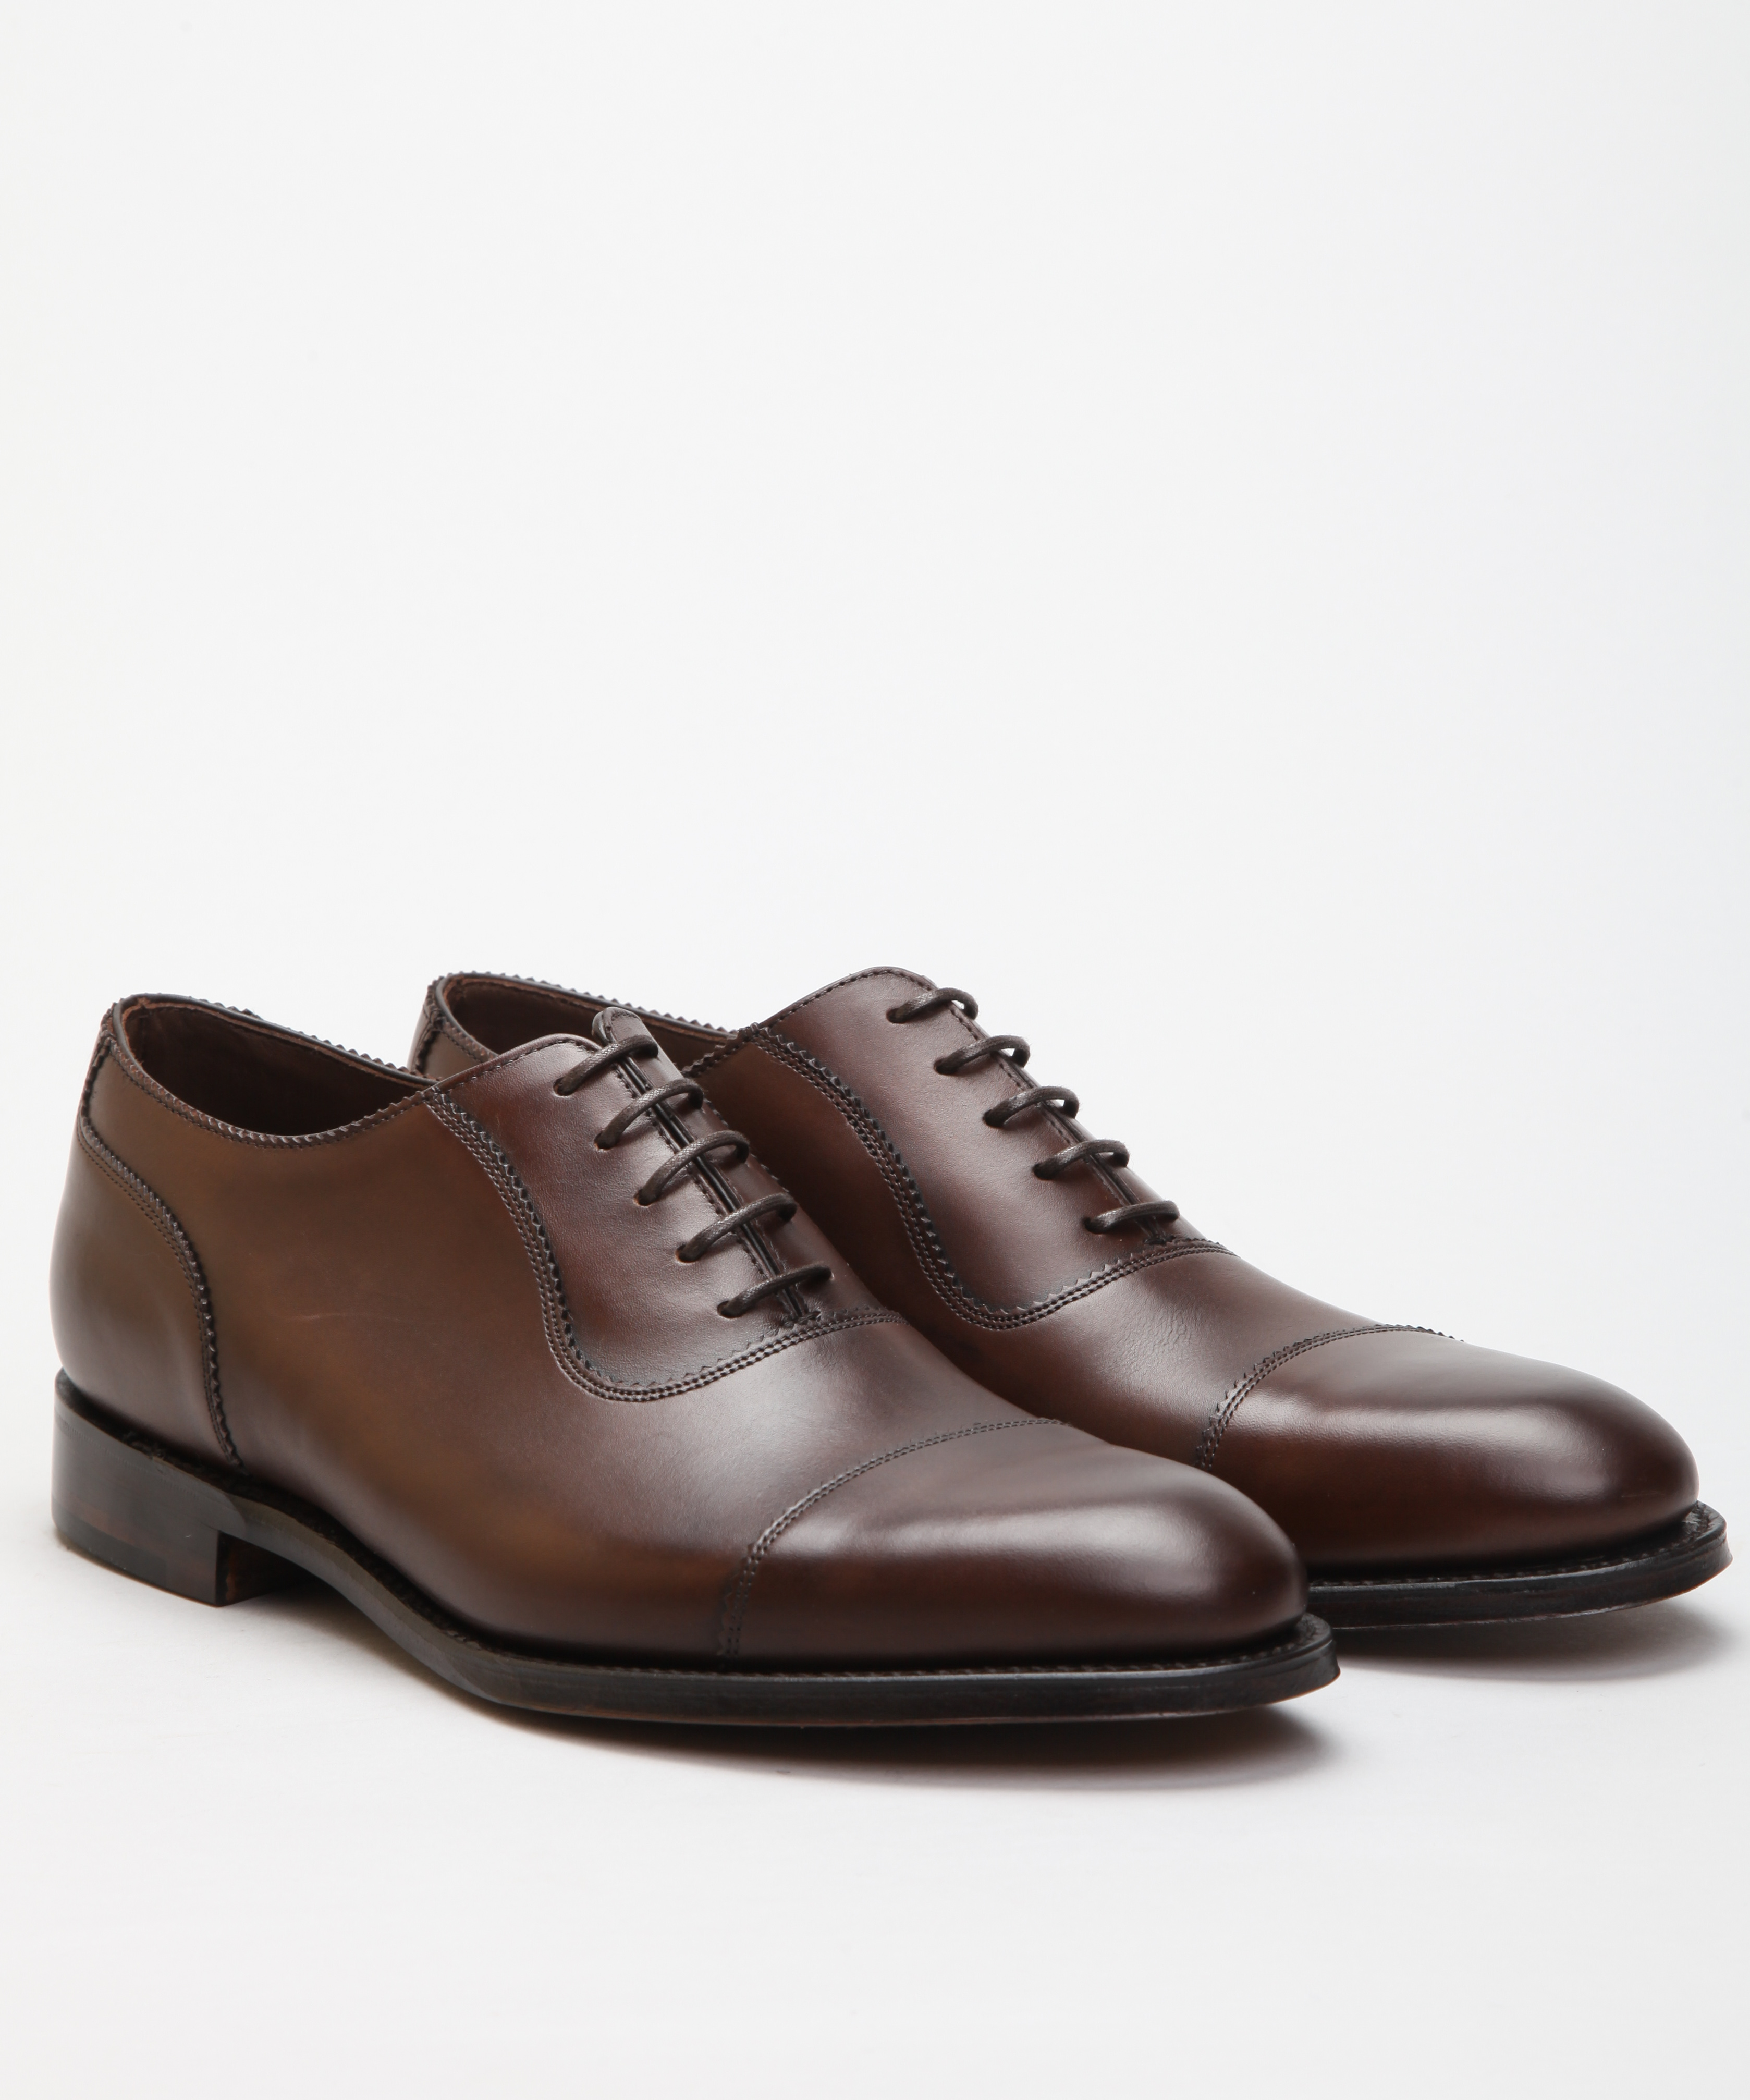 loake brown oxford shoes